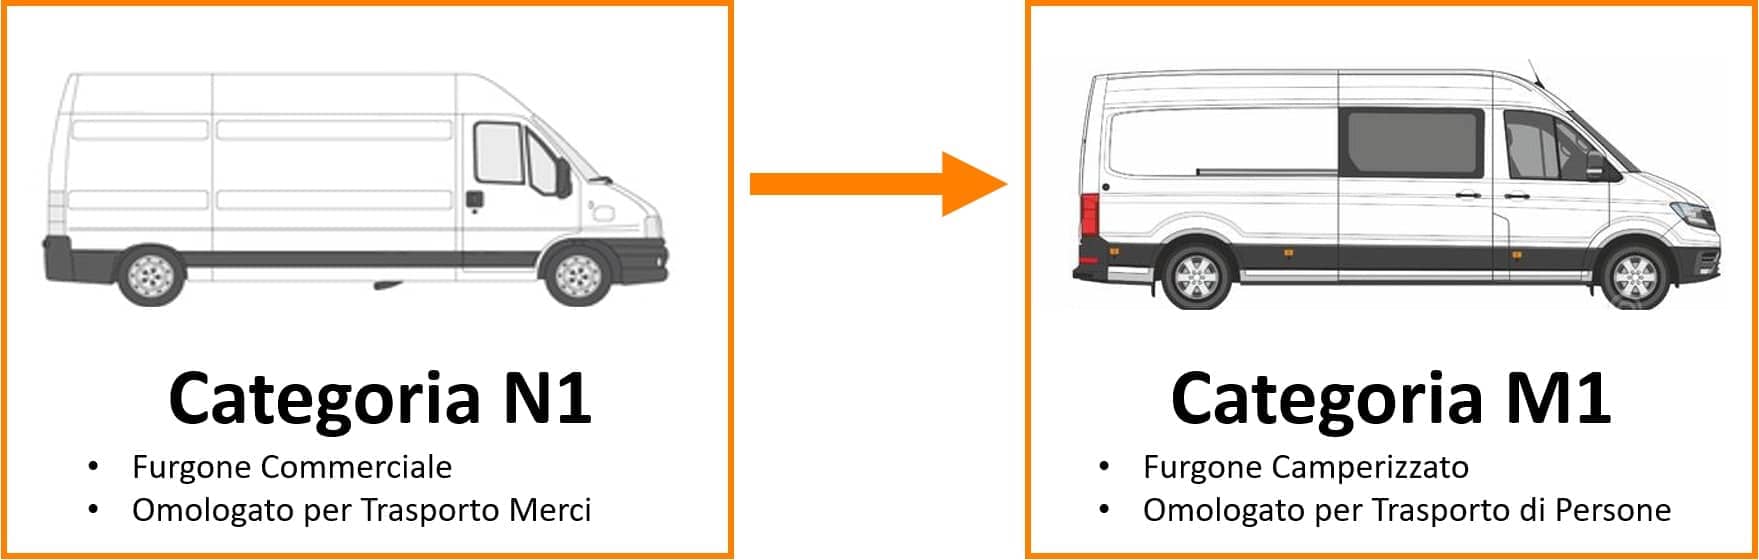 homologate a camper van from n1 to m1 in italy